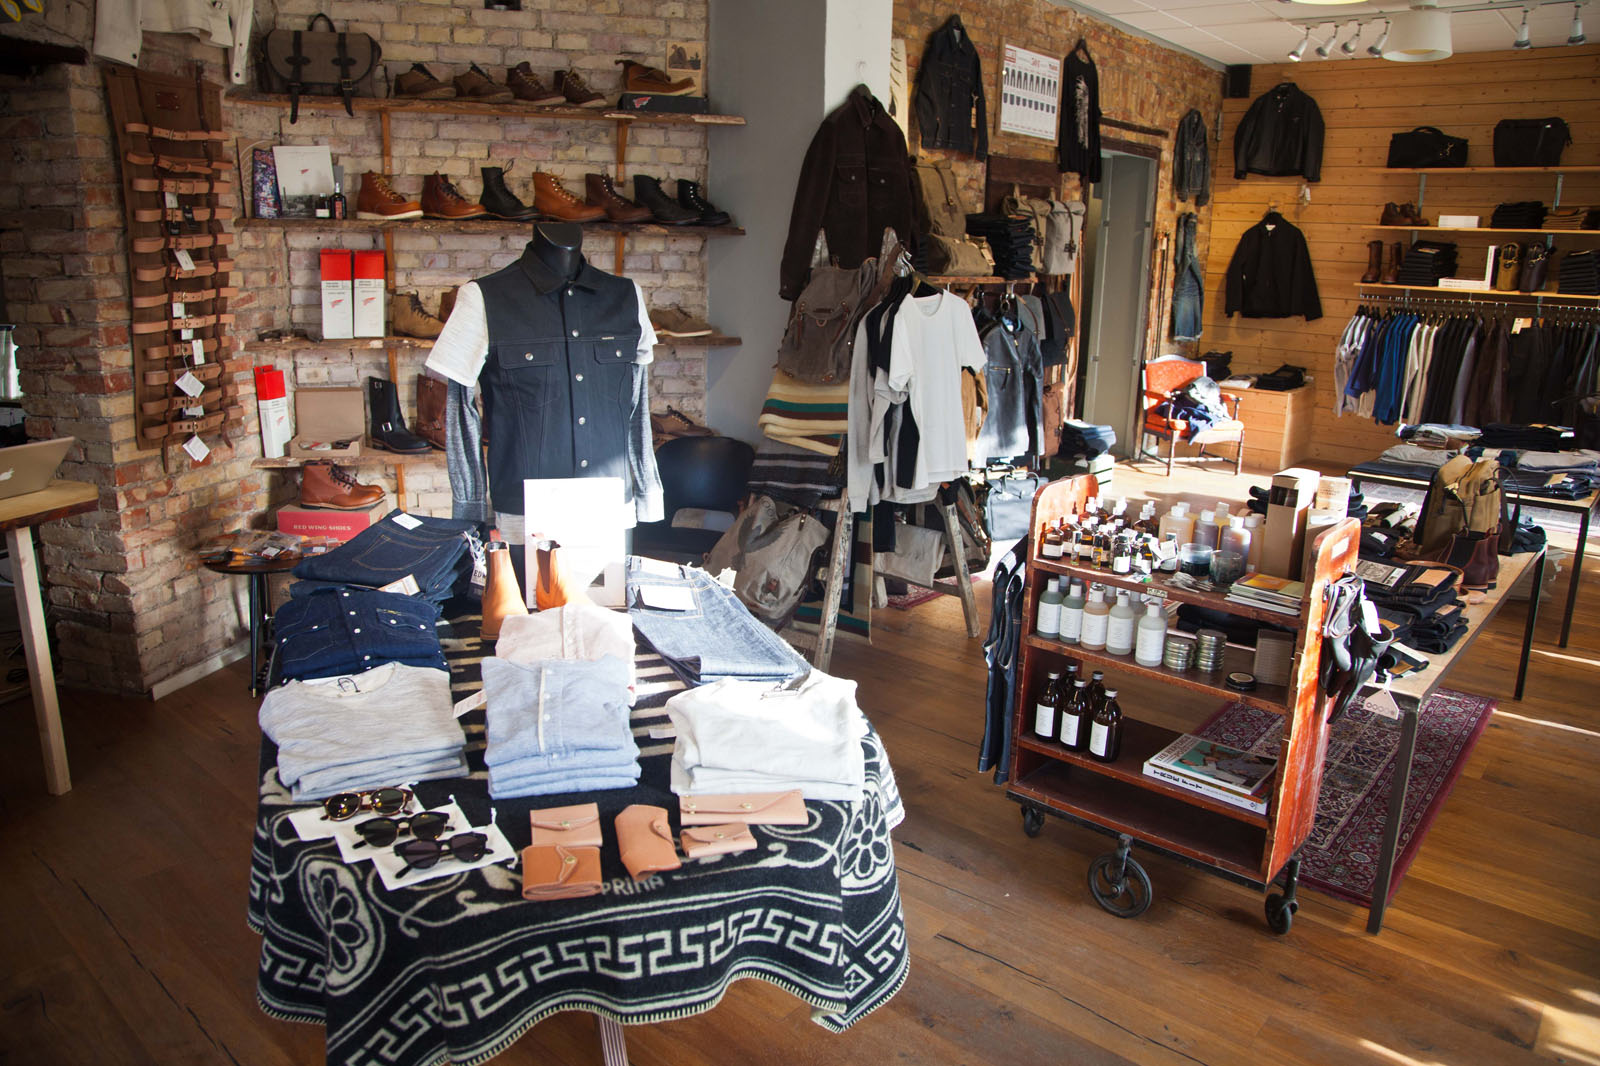 Interior shot of Meadow shop with tables and racks displaying clothing.